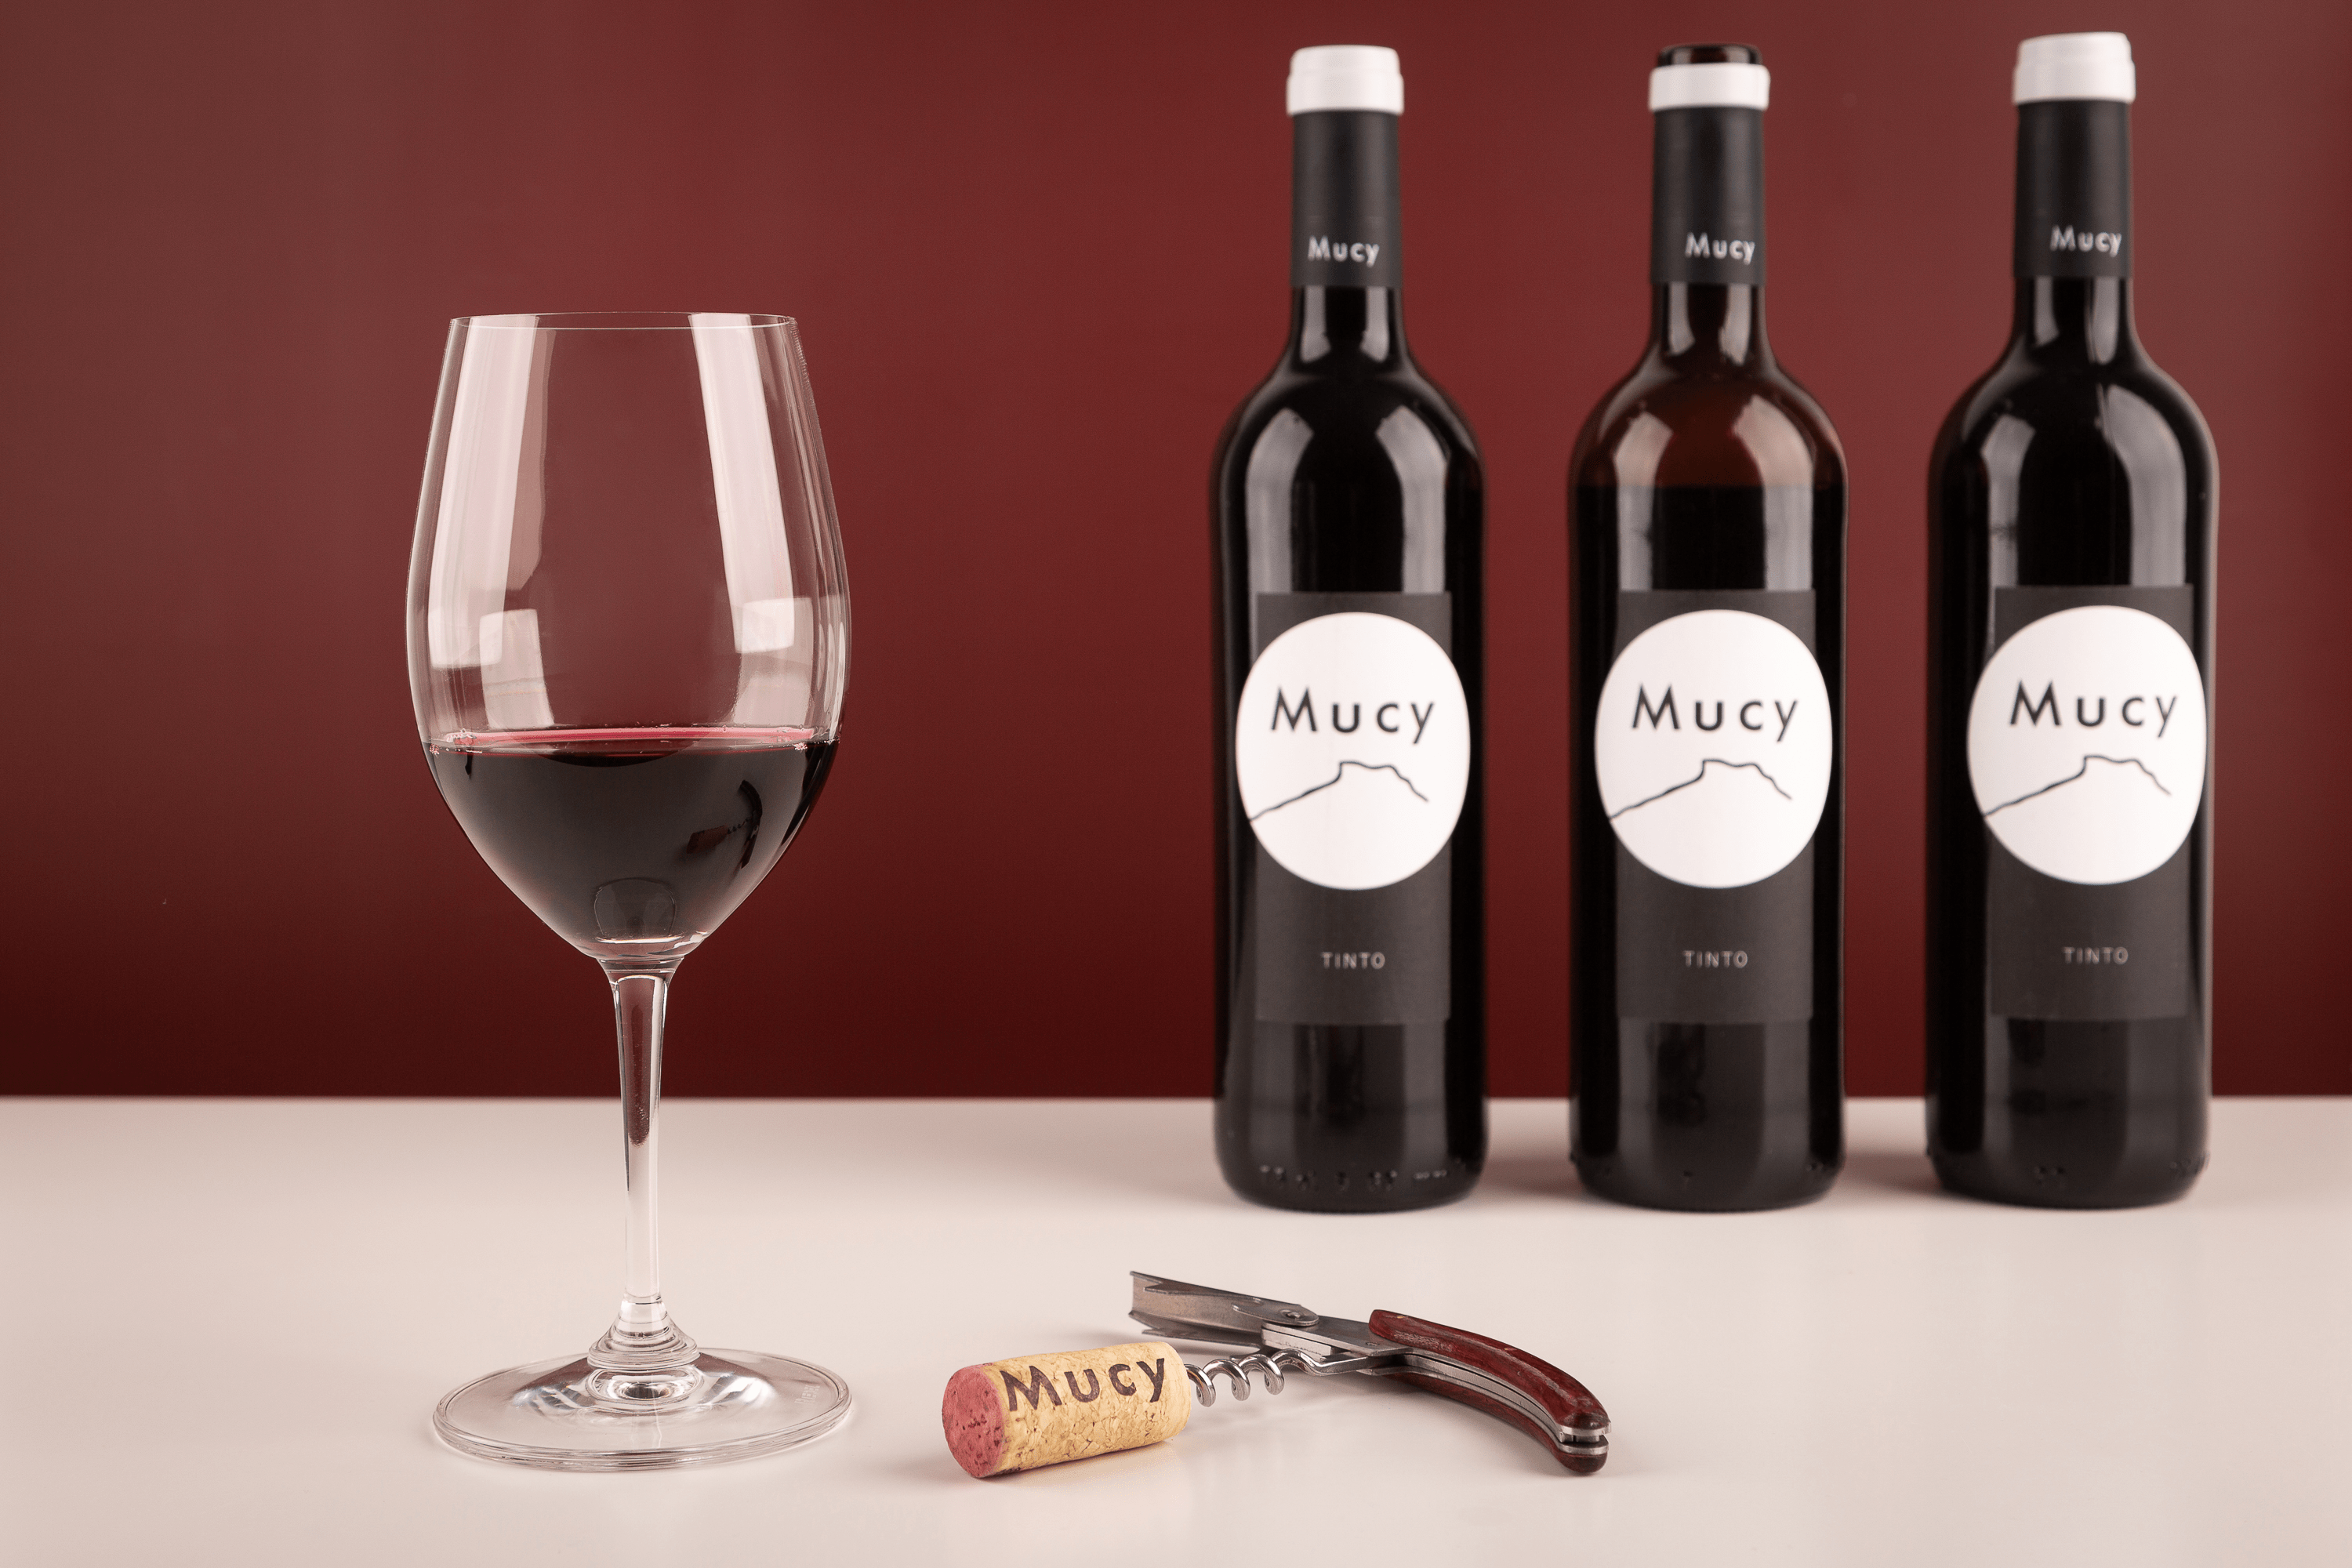 mucy tinto joven botella do cigales bodegas mucy